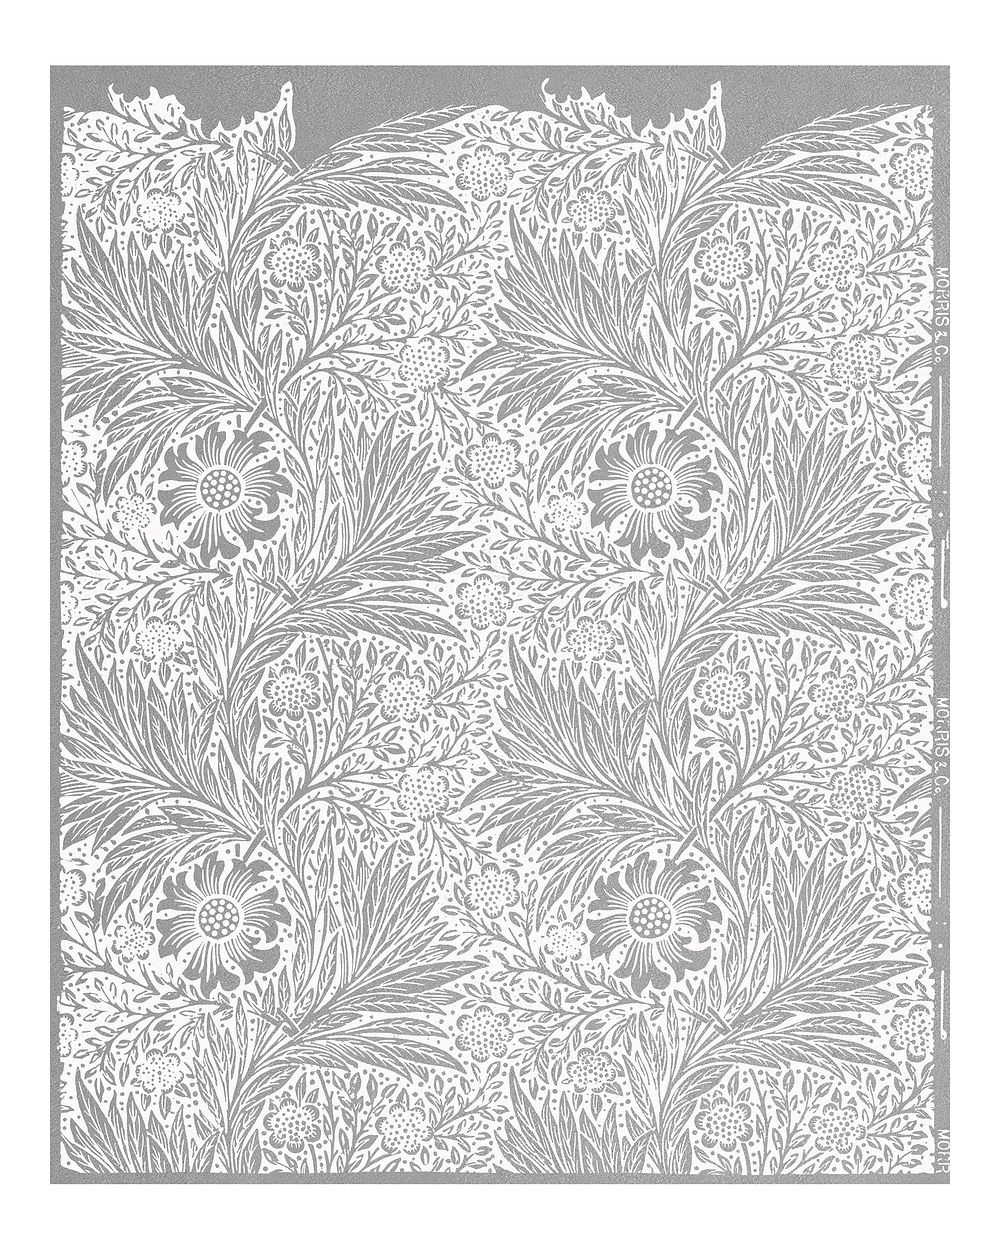 Silver marigold illustration wall art print and poster design remix from original artwork by William Morris.